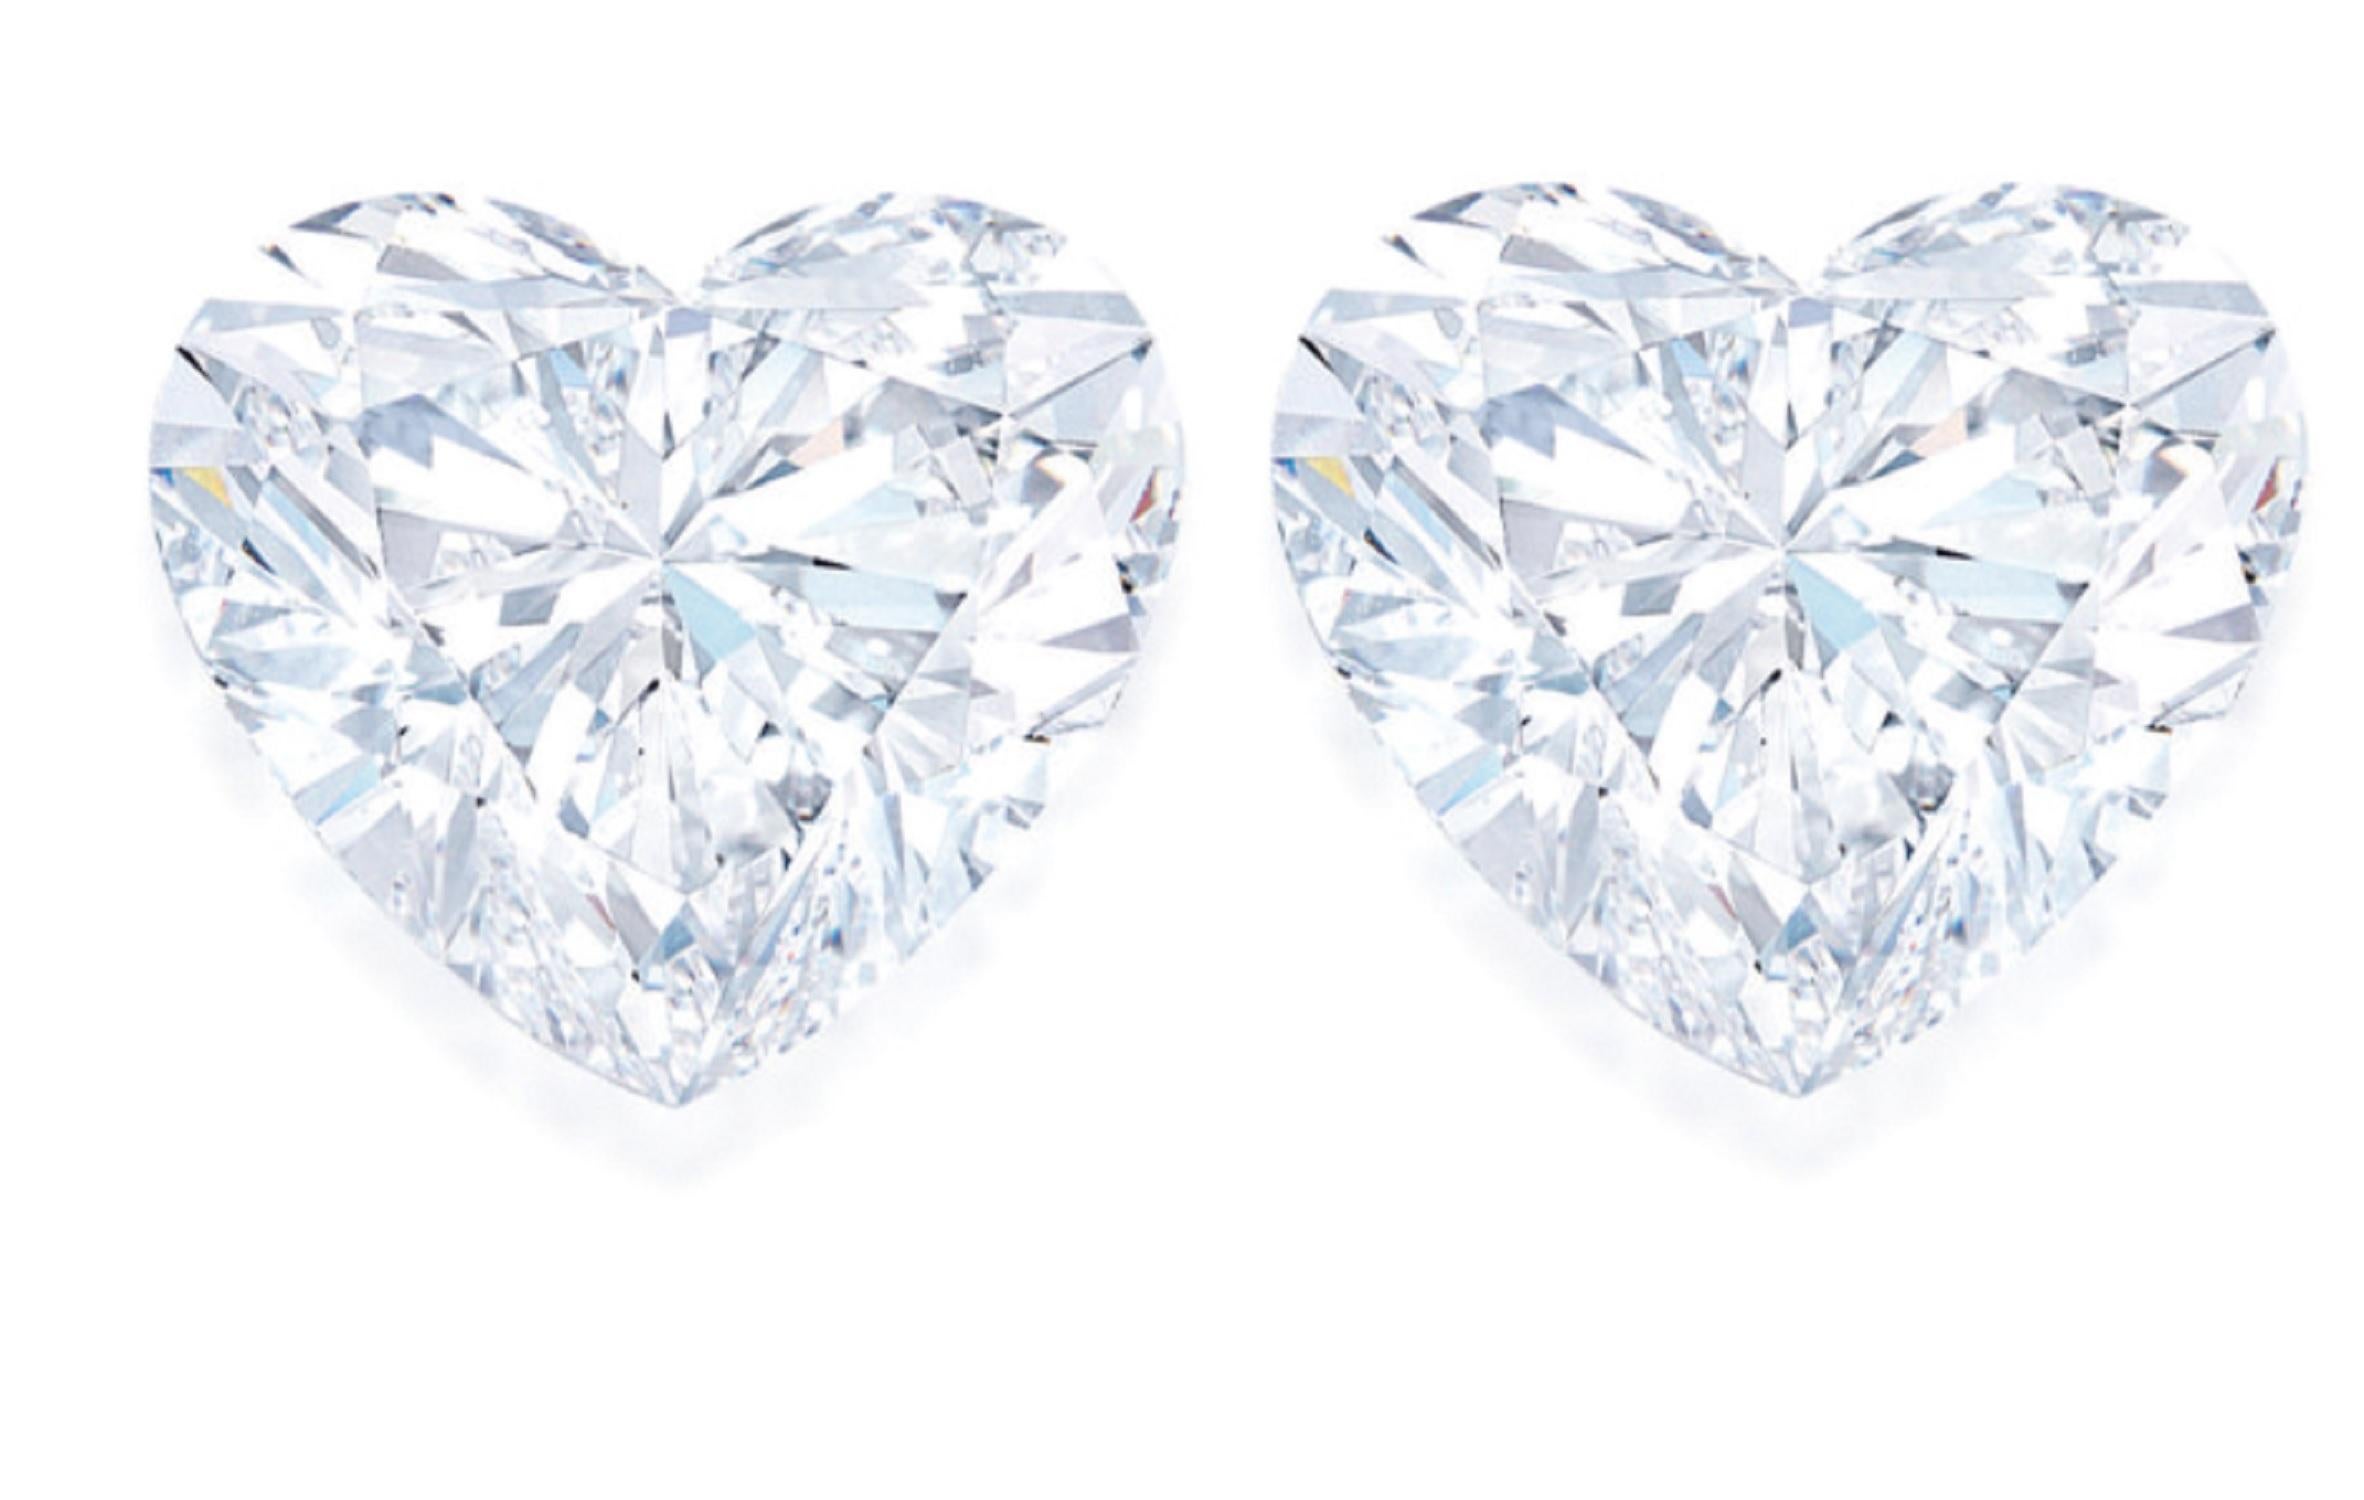 GIA Certified 1.56 Carat Heart-Shape Diamond Studs 
100% eye clean and full of sparkle